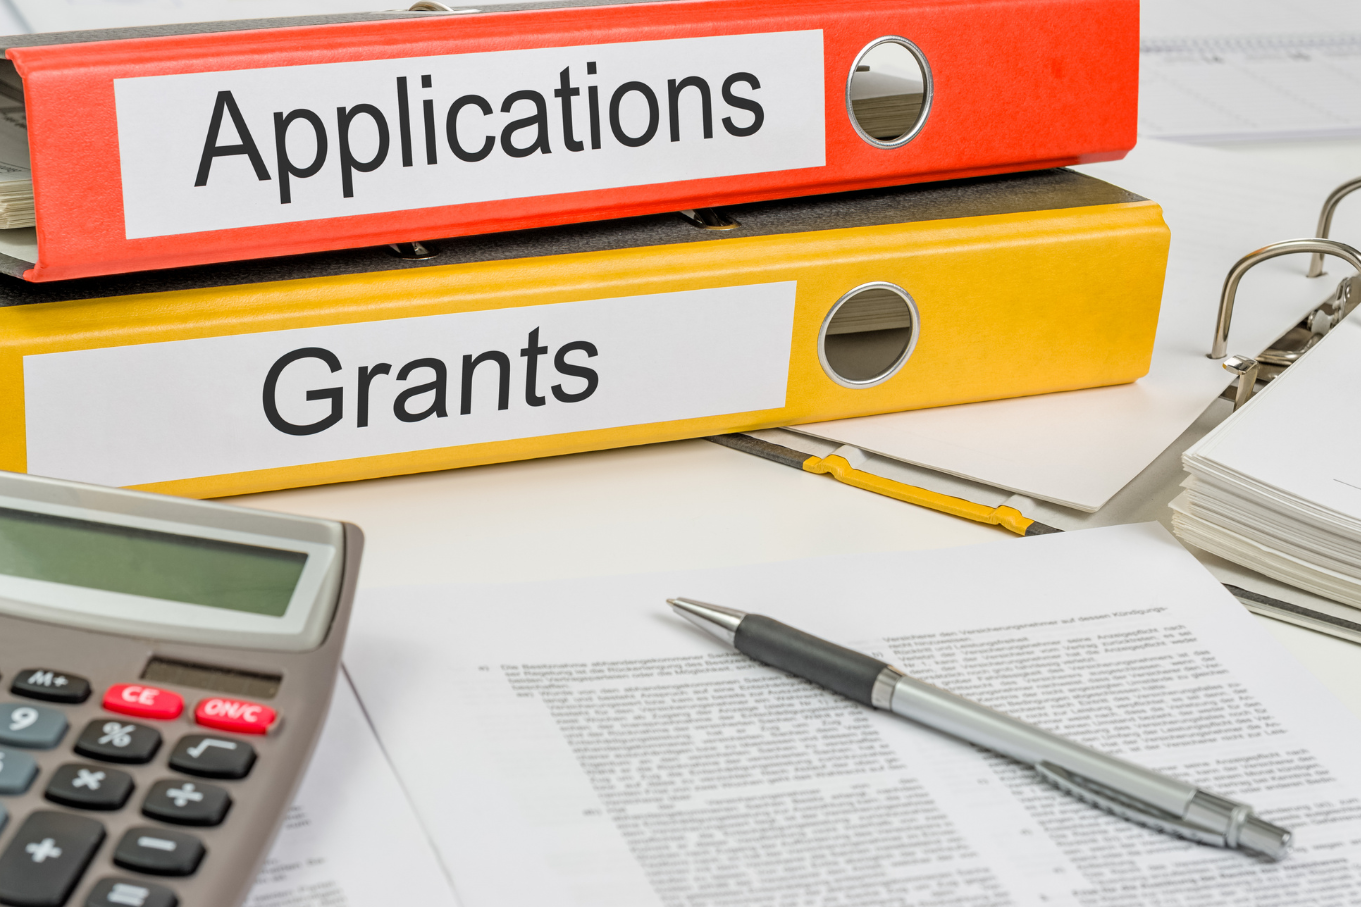 two binders appear on a desk with papers, pen and a calculator. One says "Applications" the other says "Grants."